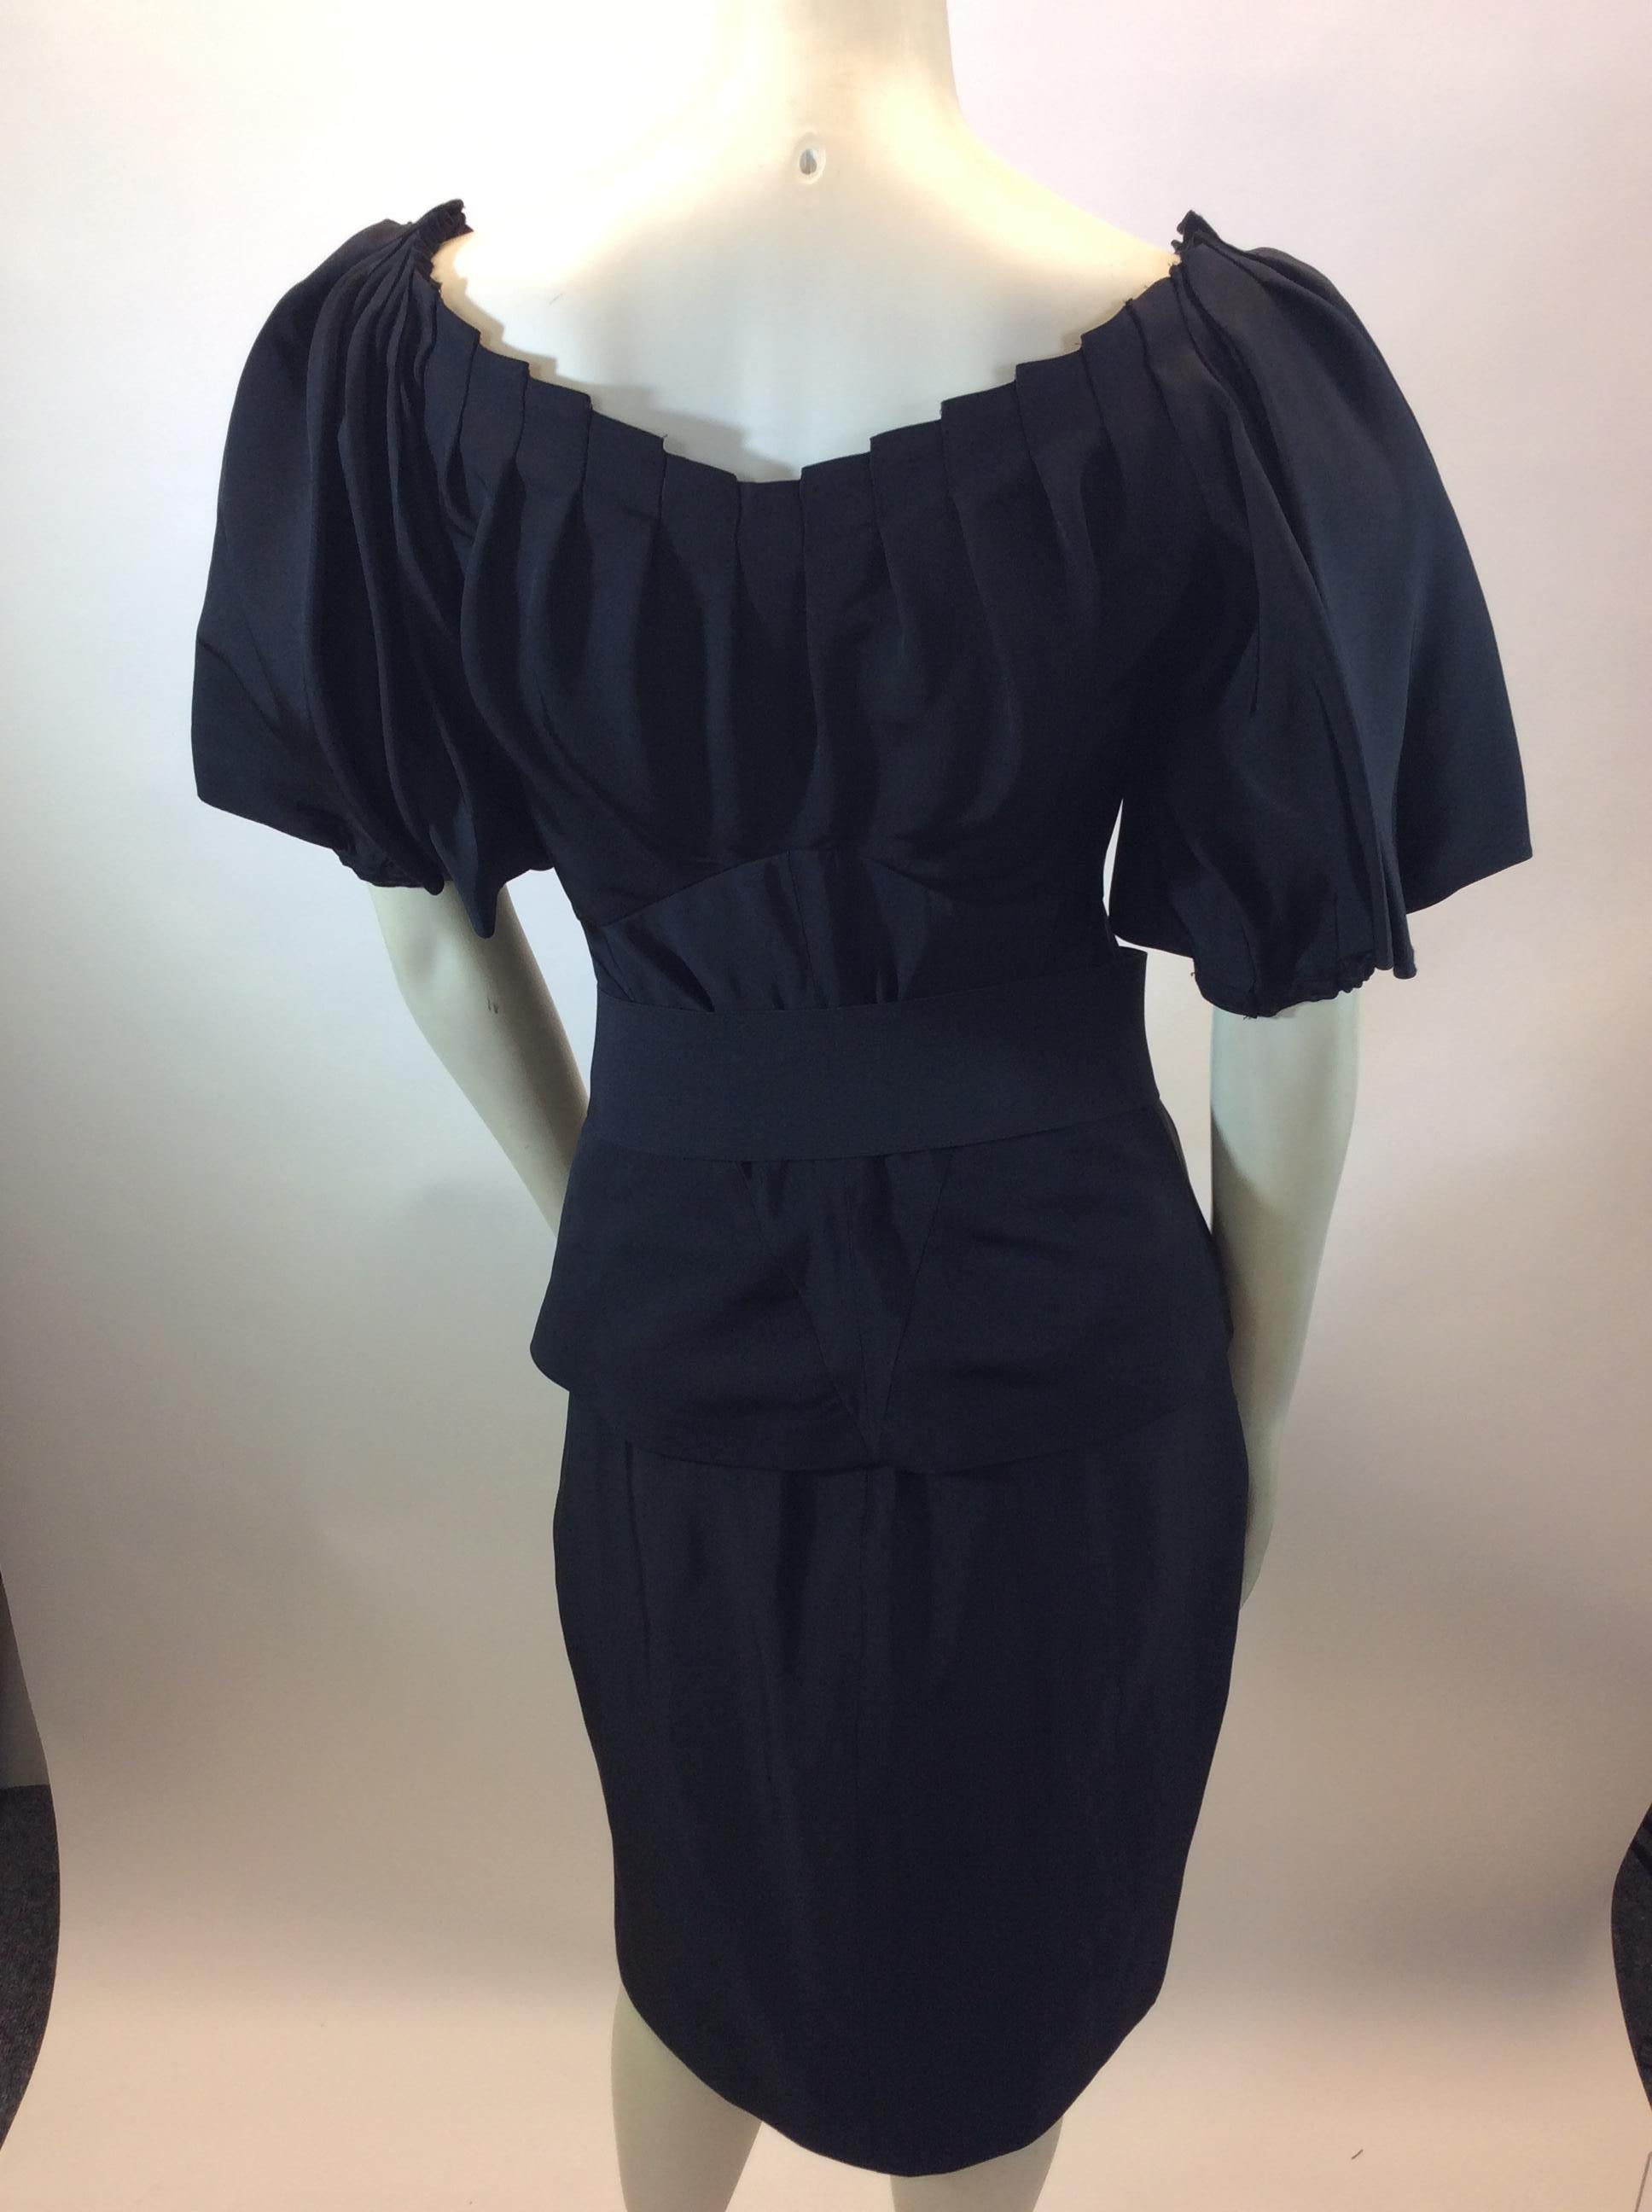 Zac Posen Black Three Piece Skirt Set In Good Condition For Sale In Narberth, PA